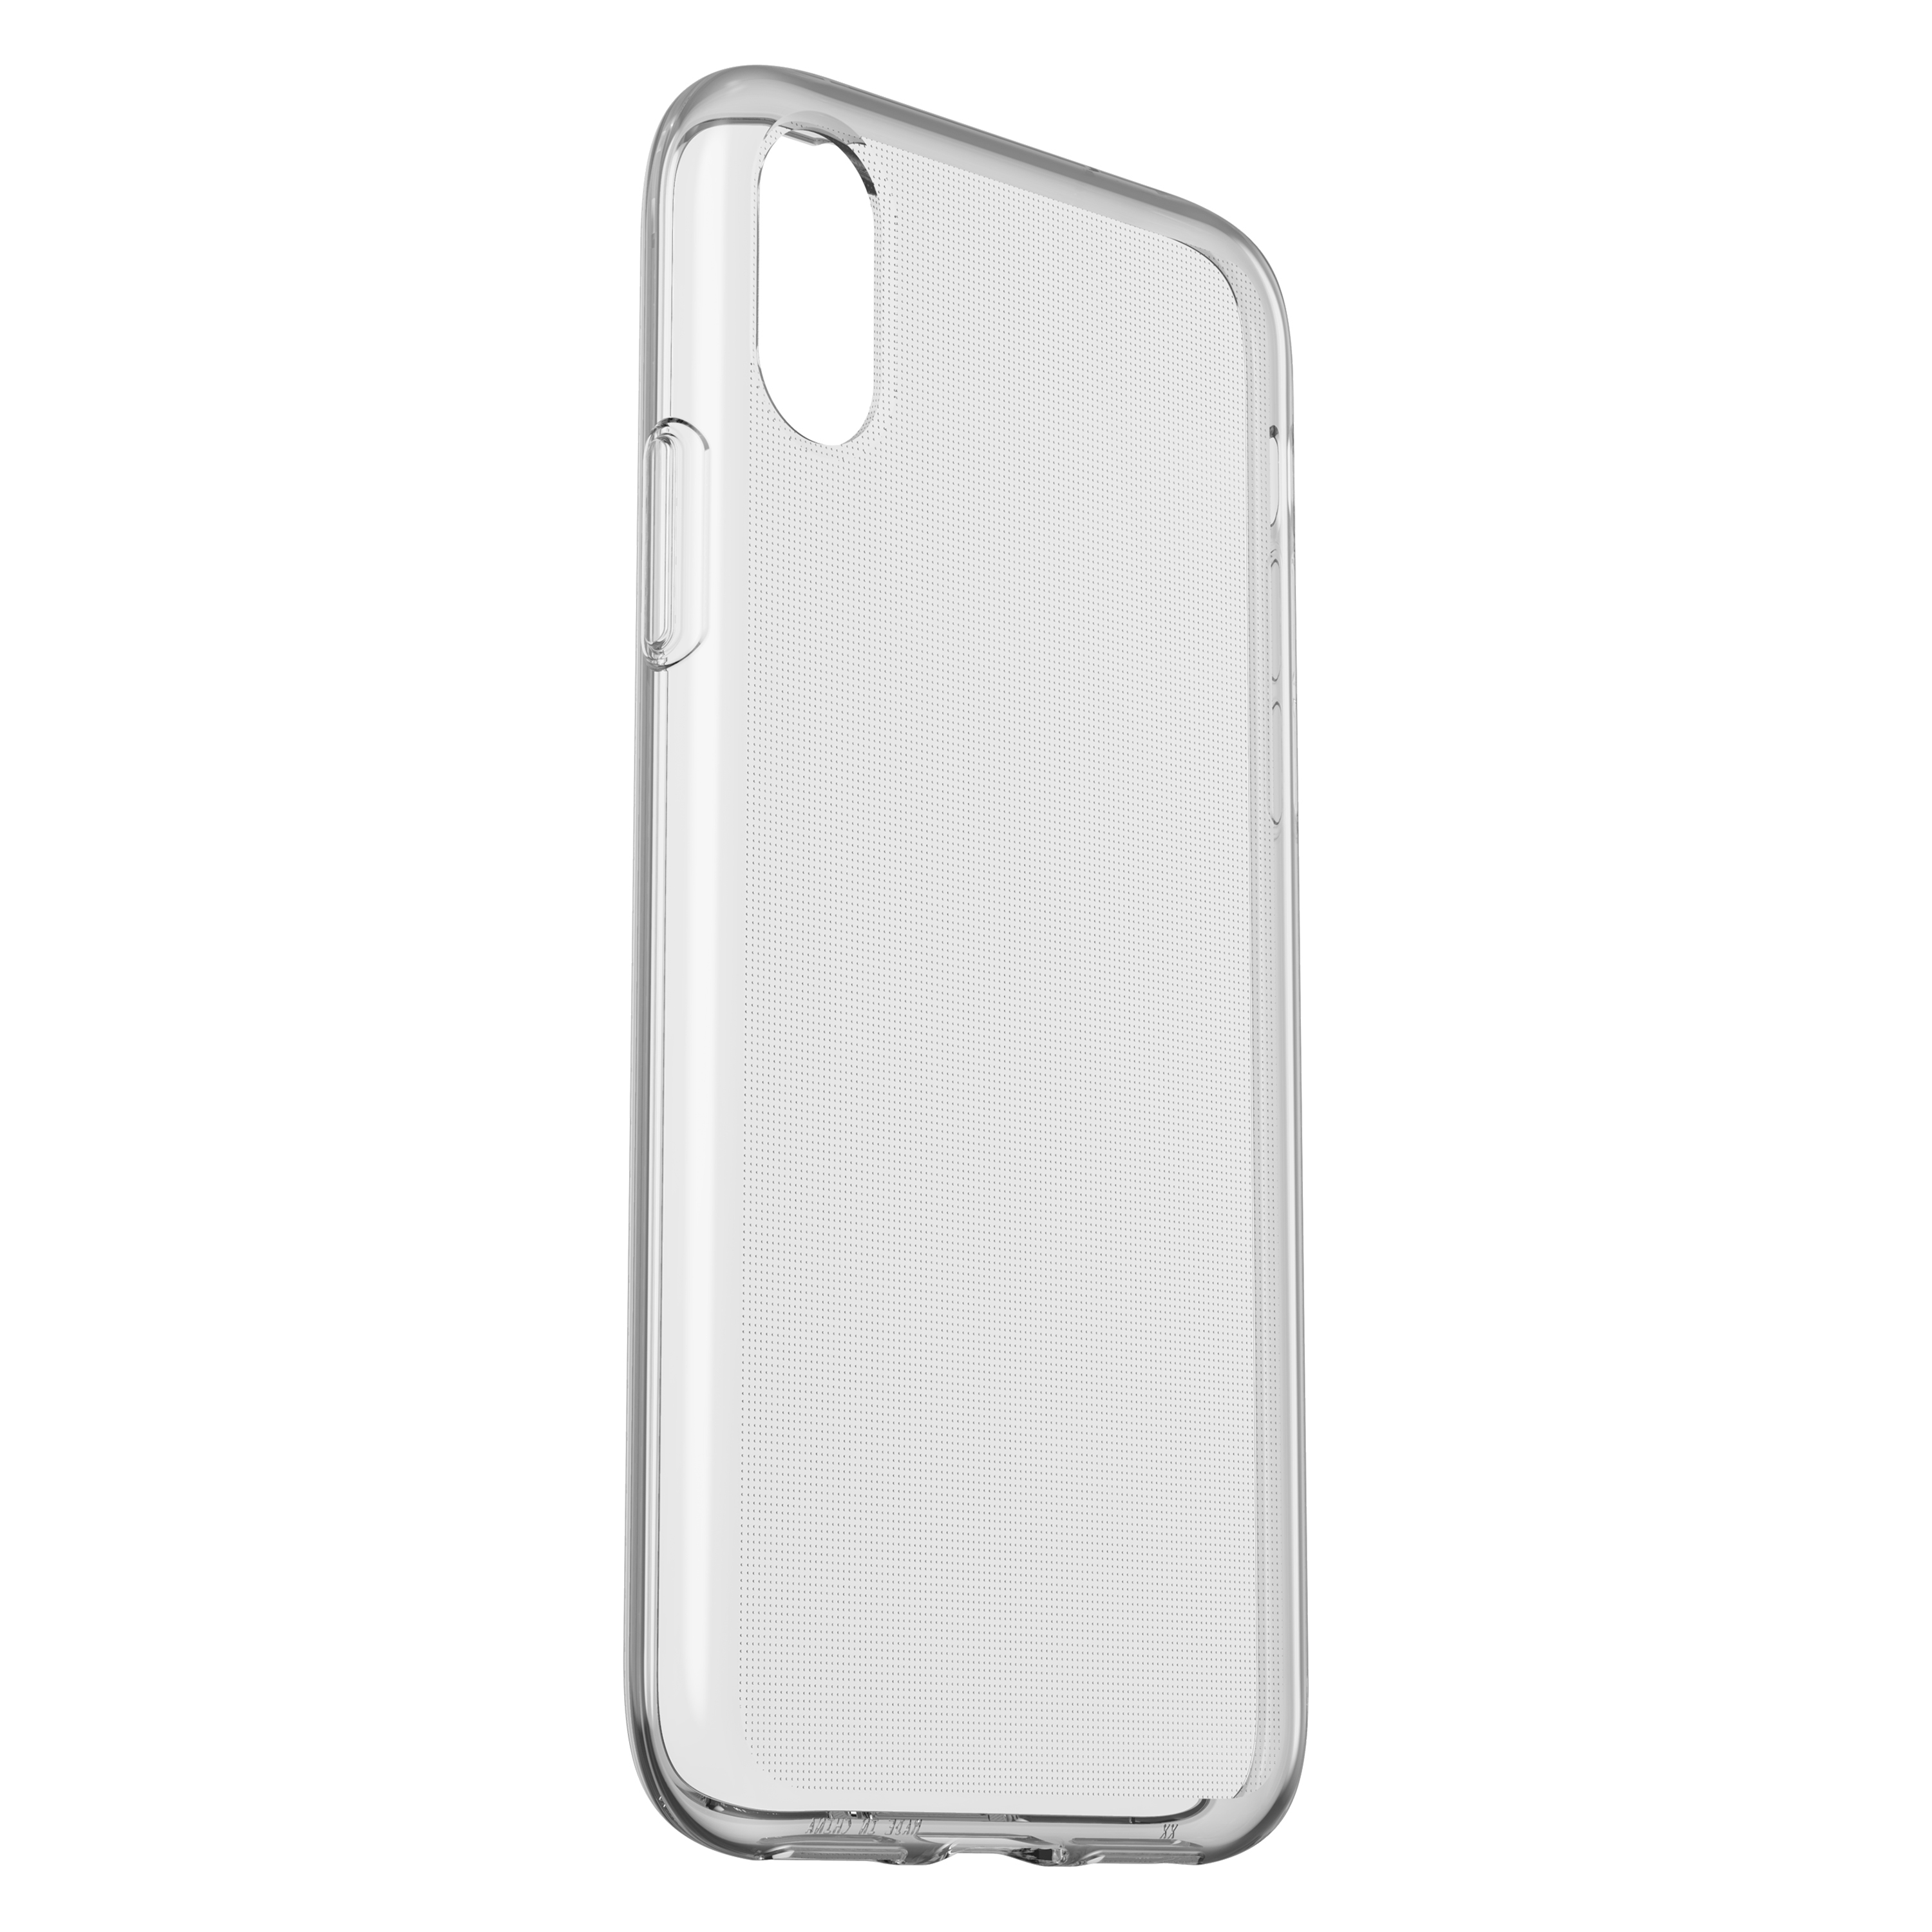 XS, Clearly Apple, Protected, iPhone Backcover, OTTERBOX Transparent